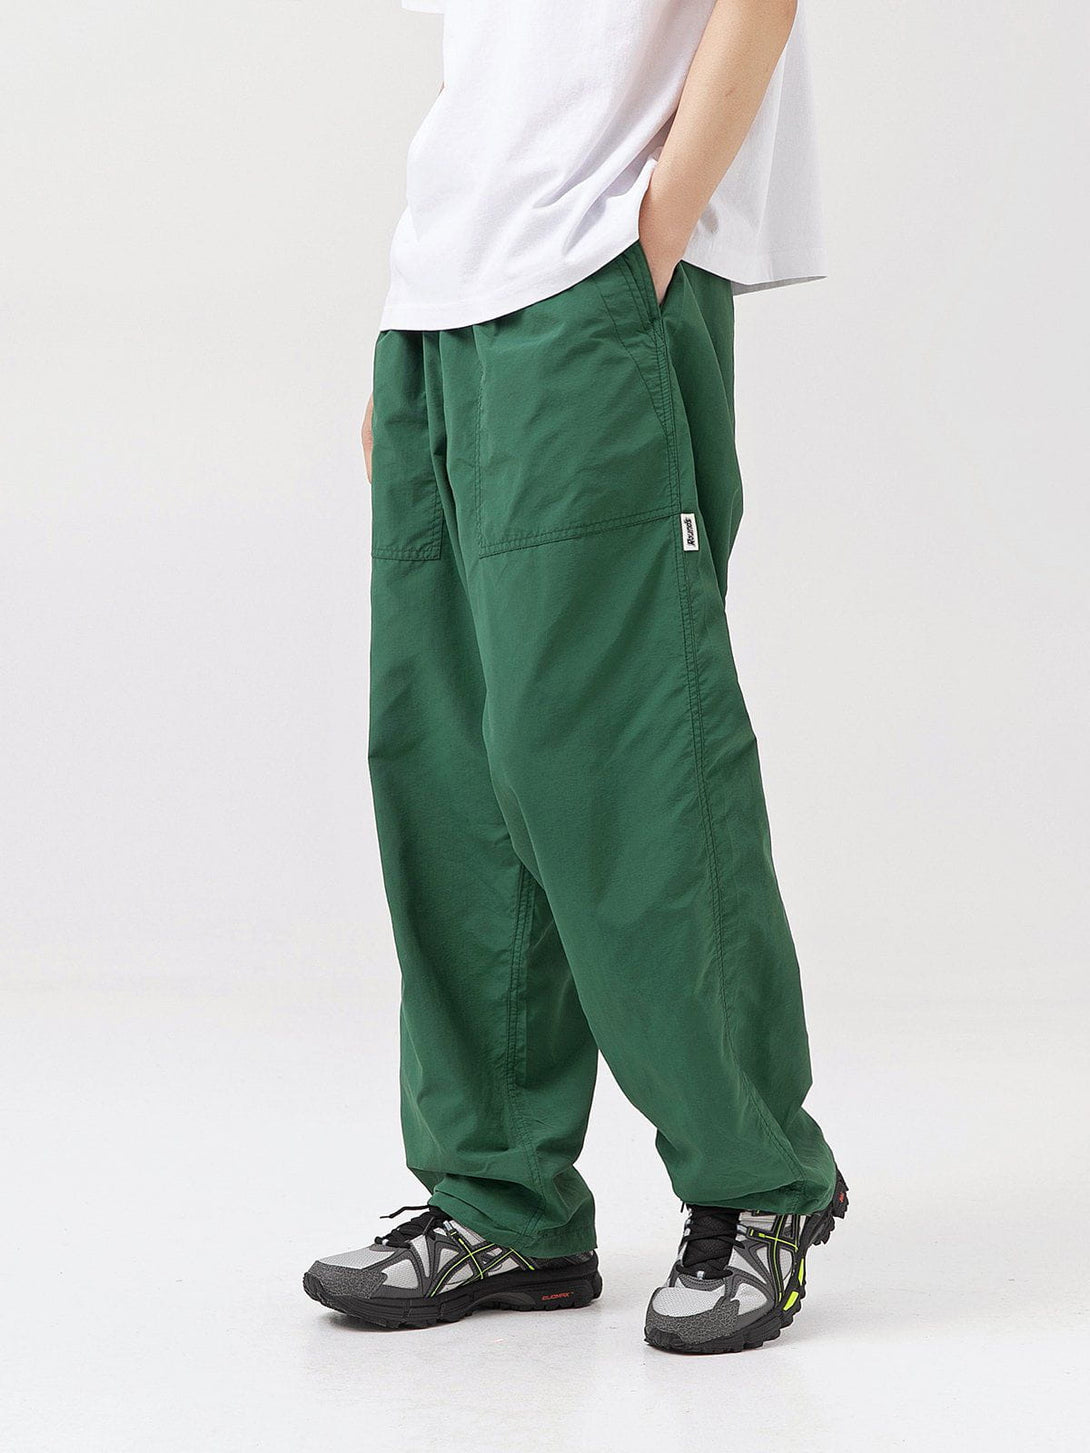 Majesda® - Solid Color Multiple Pockets Cargo Pants outfit ideas streetwear fashion